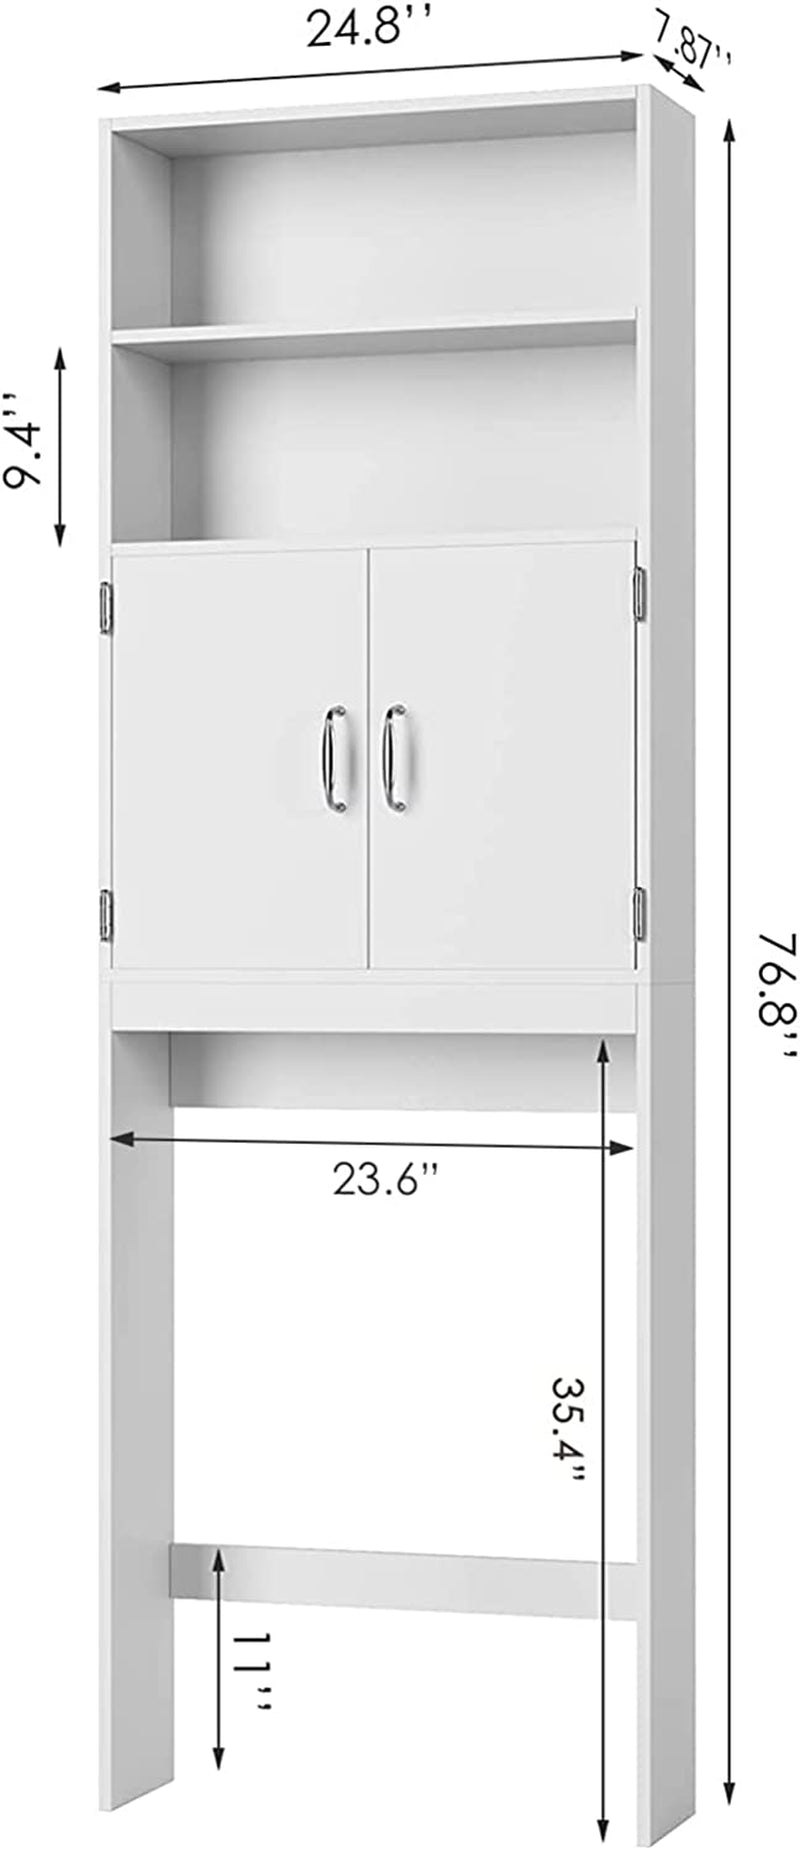 HOSTACK over the Toilet Storage, Double Door Bathroom Organizer Toilet Cabinet, Freestanding above Toilet Rack with Open Shelves and Adjustable Bottom Bar, 76.8 in H, White